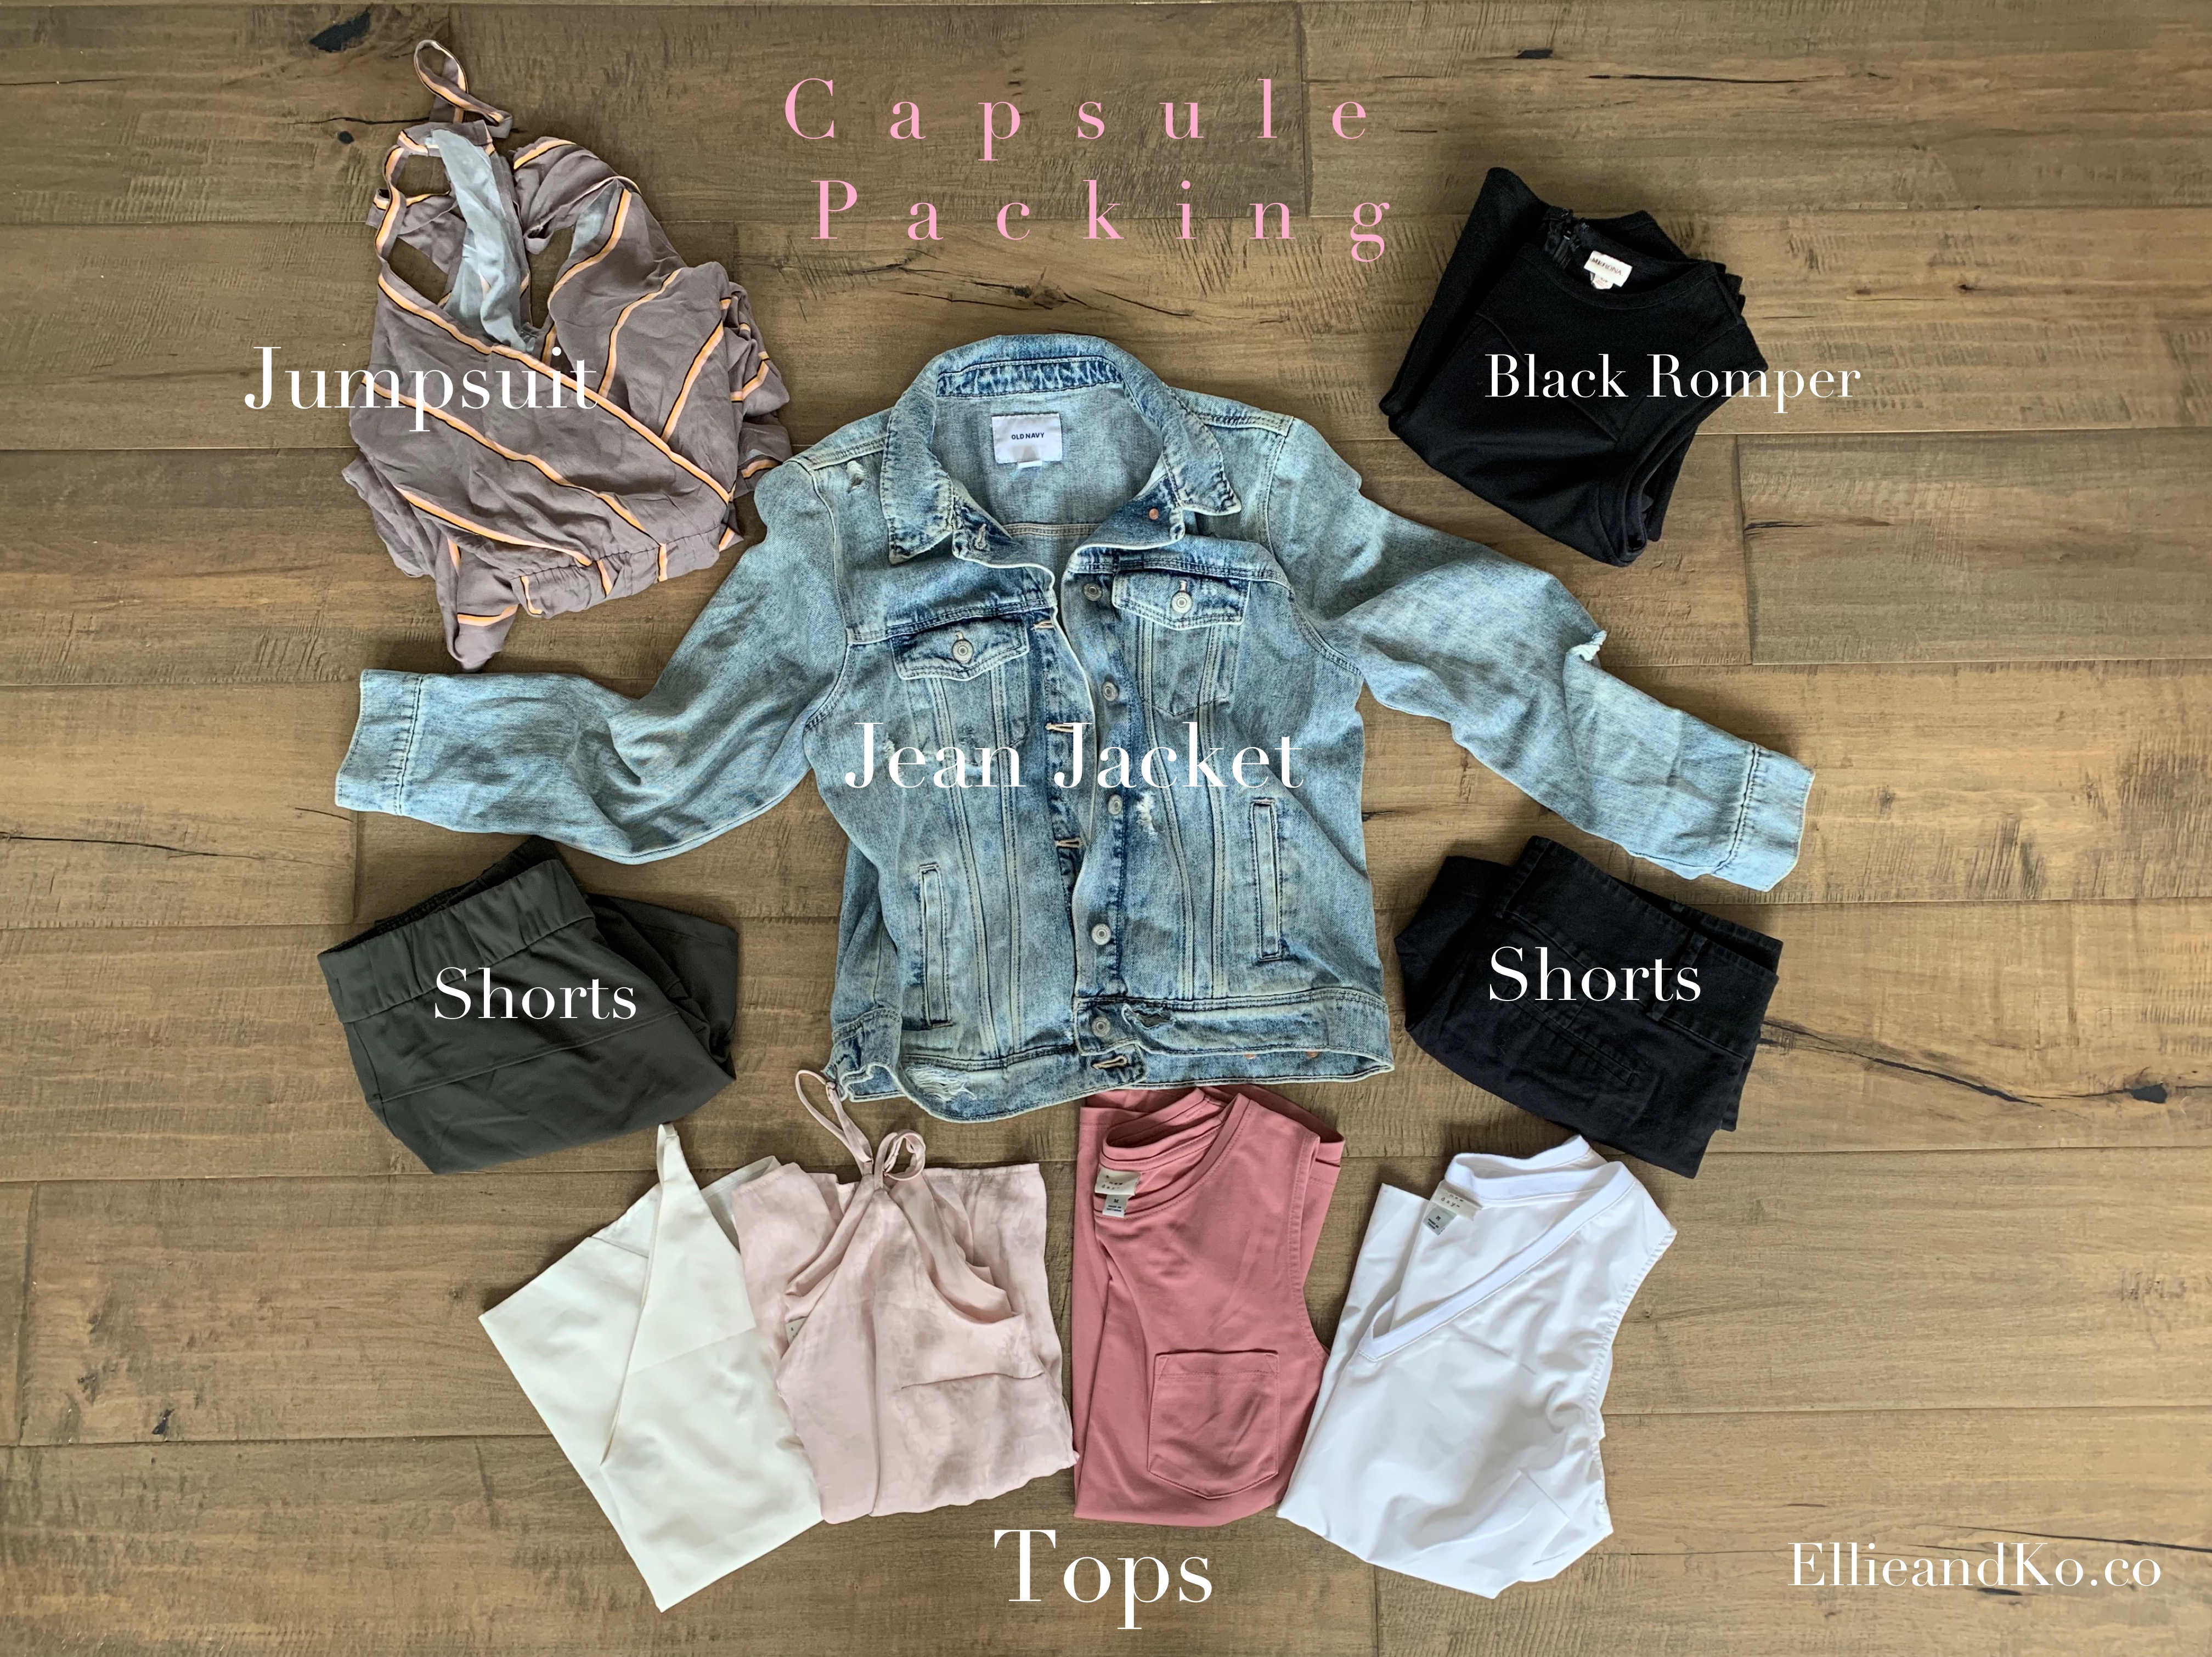 How to Pack Mommy & Me in Two Packing Cubes - A Guide to a Traveling Capsule Wardrobe